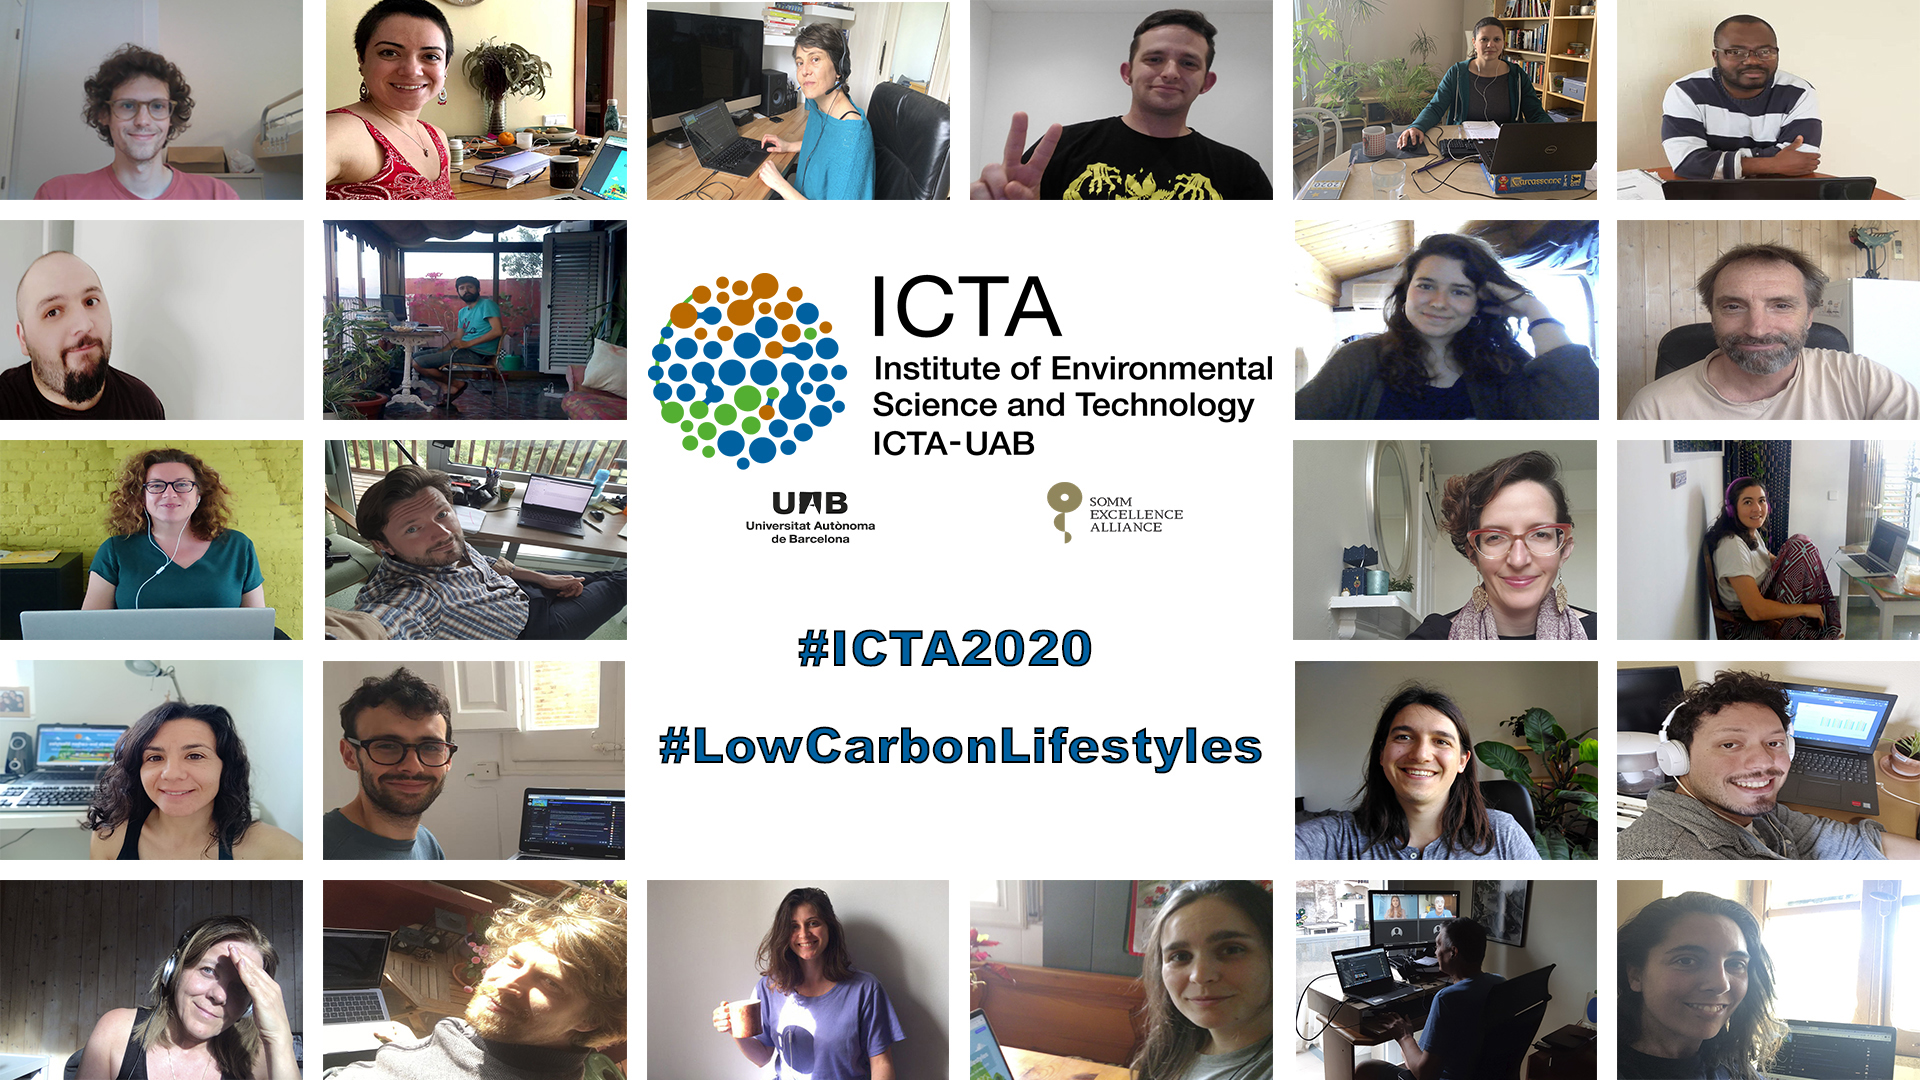 ICTA2020 Virtual Conference on Low-Carbon Lifestyles